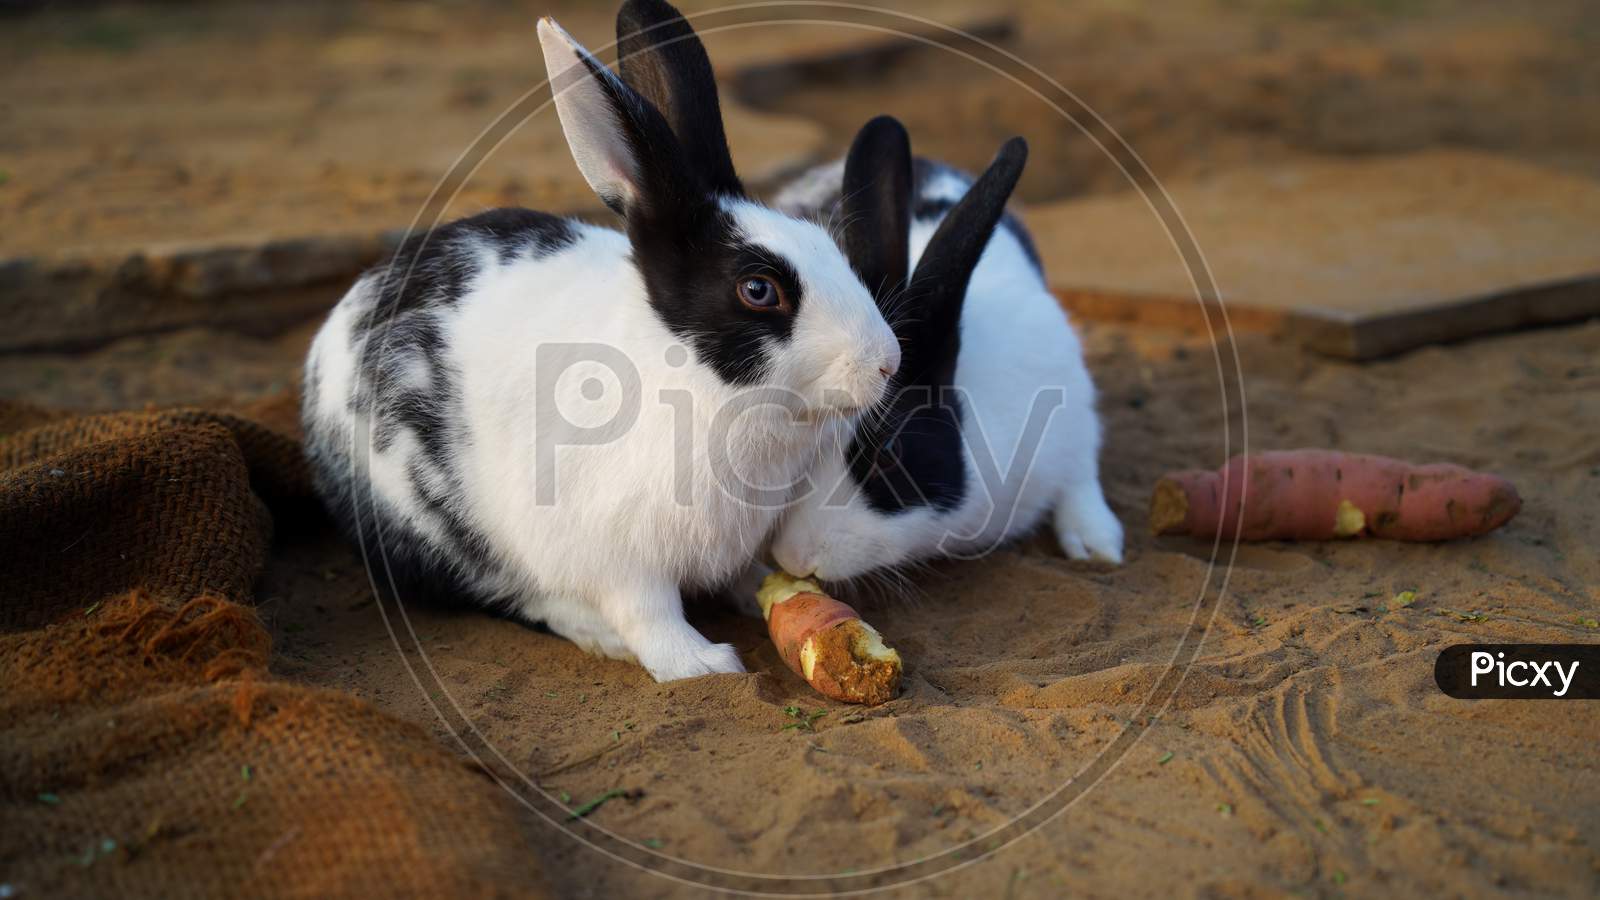 Two Cute And Innocent Rabbit Closeup With Black And White Spotted Line, Eating Grass And Vegetable In Morning Time.